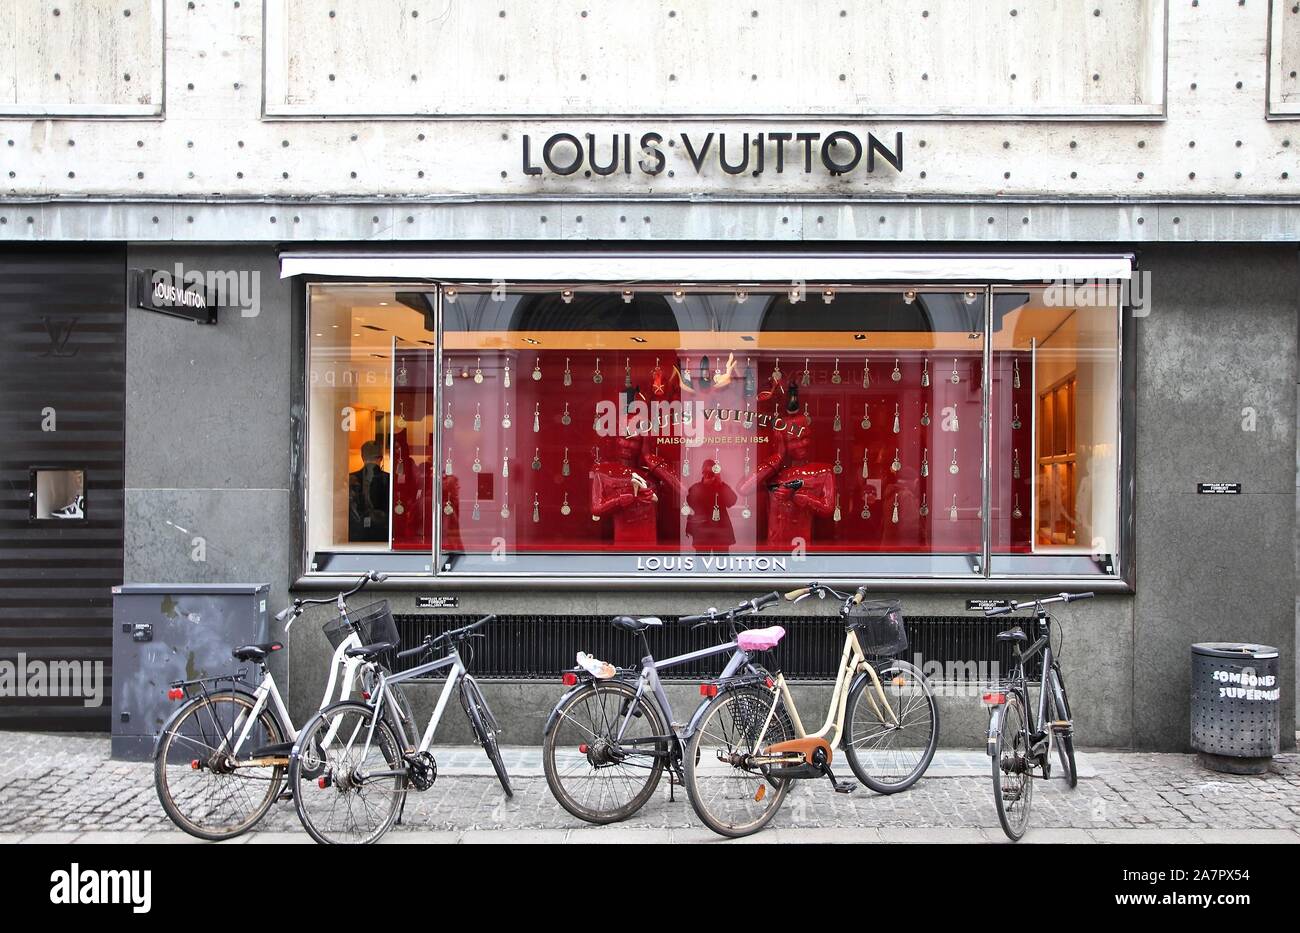 Exterior Louis Vuitton Store On Stroget Editorial Stock Photo - Stock Image